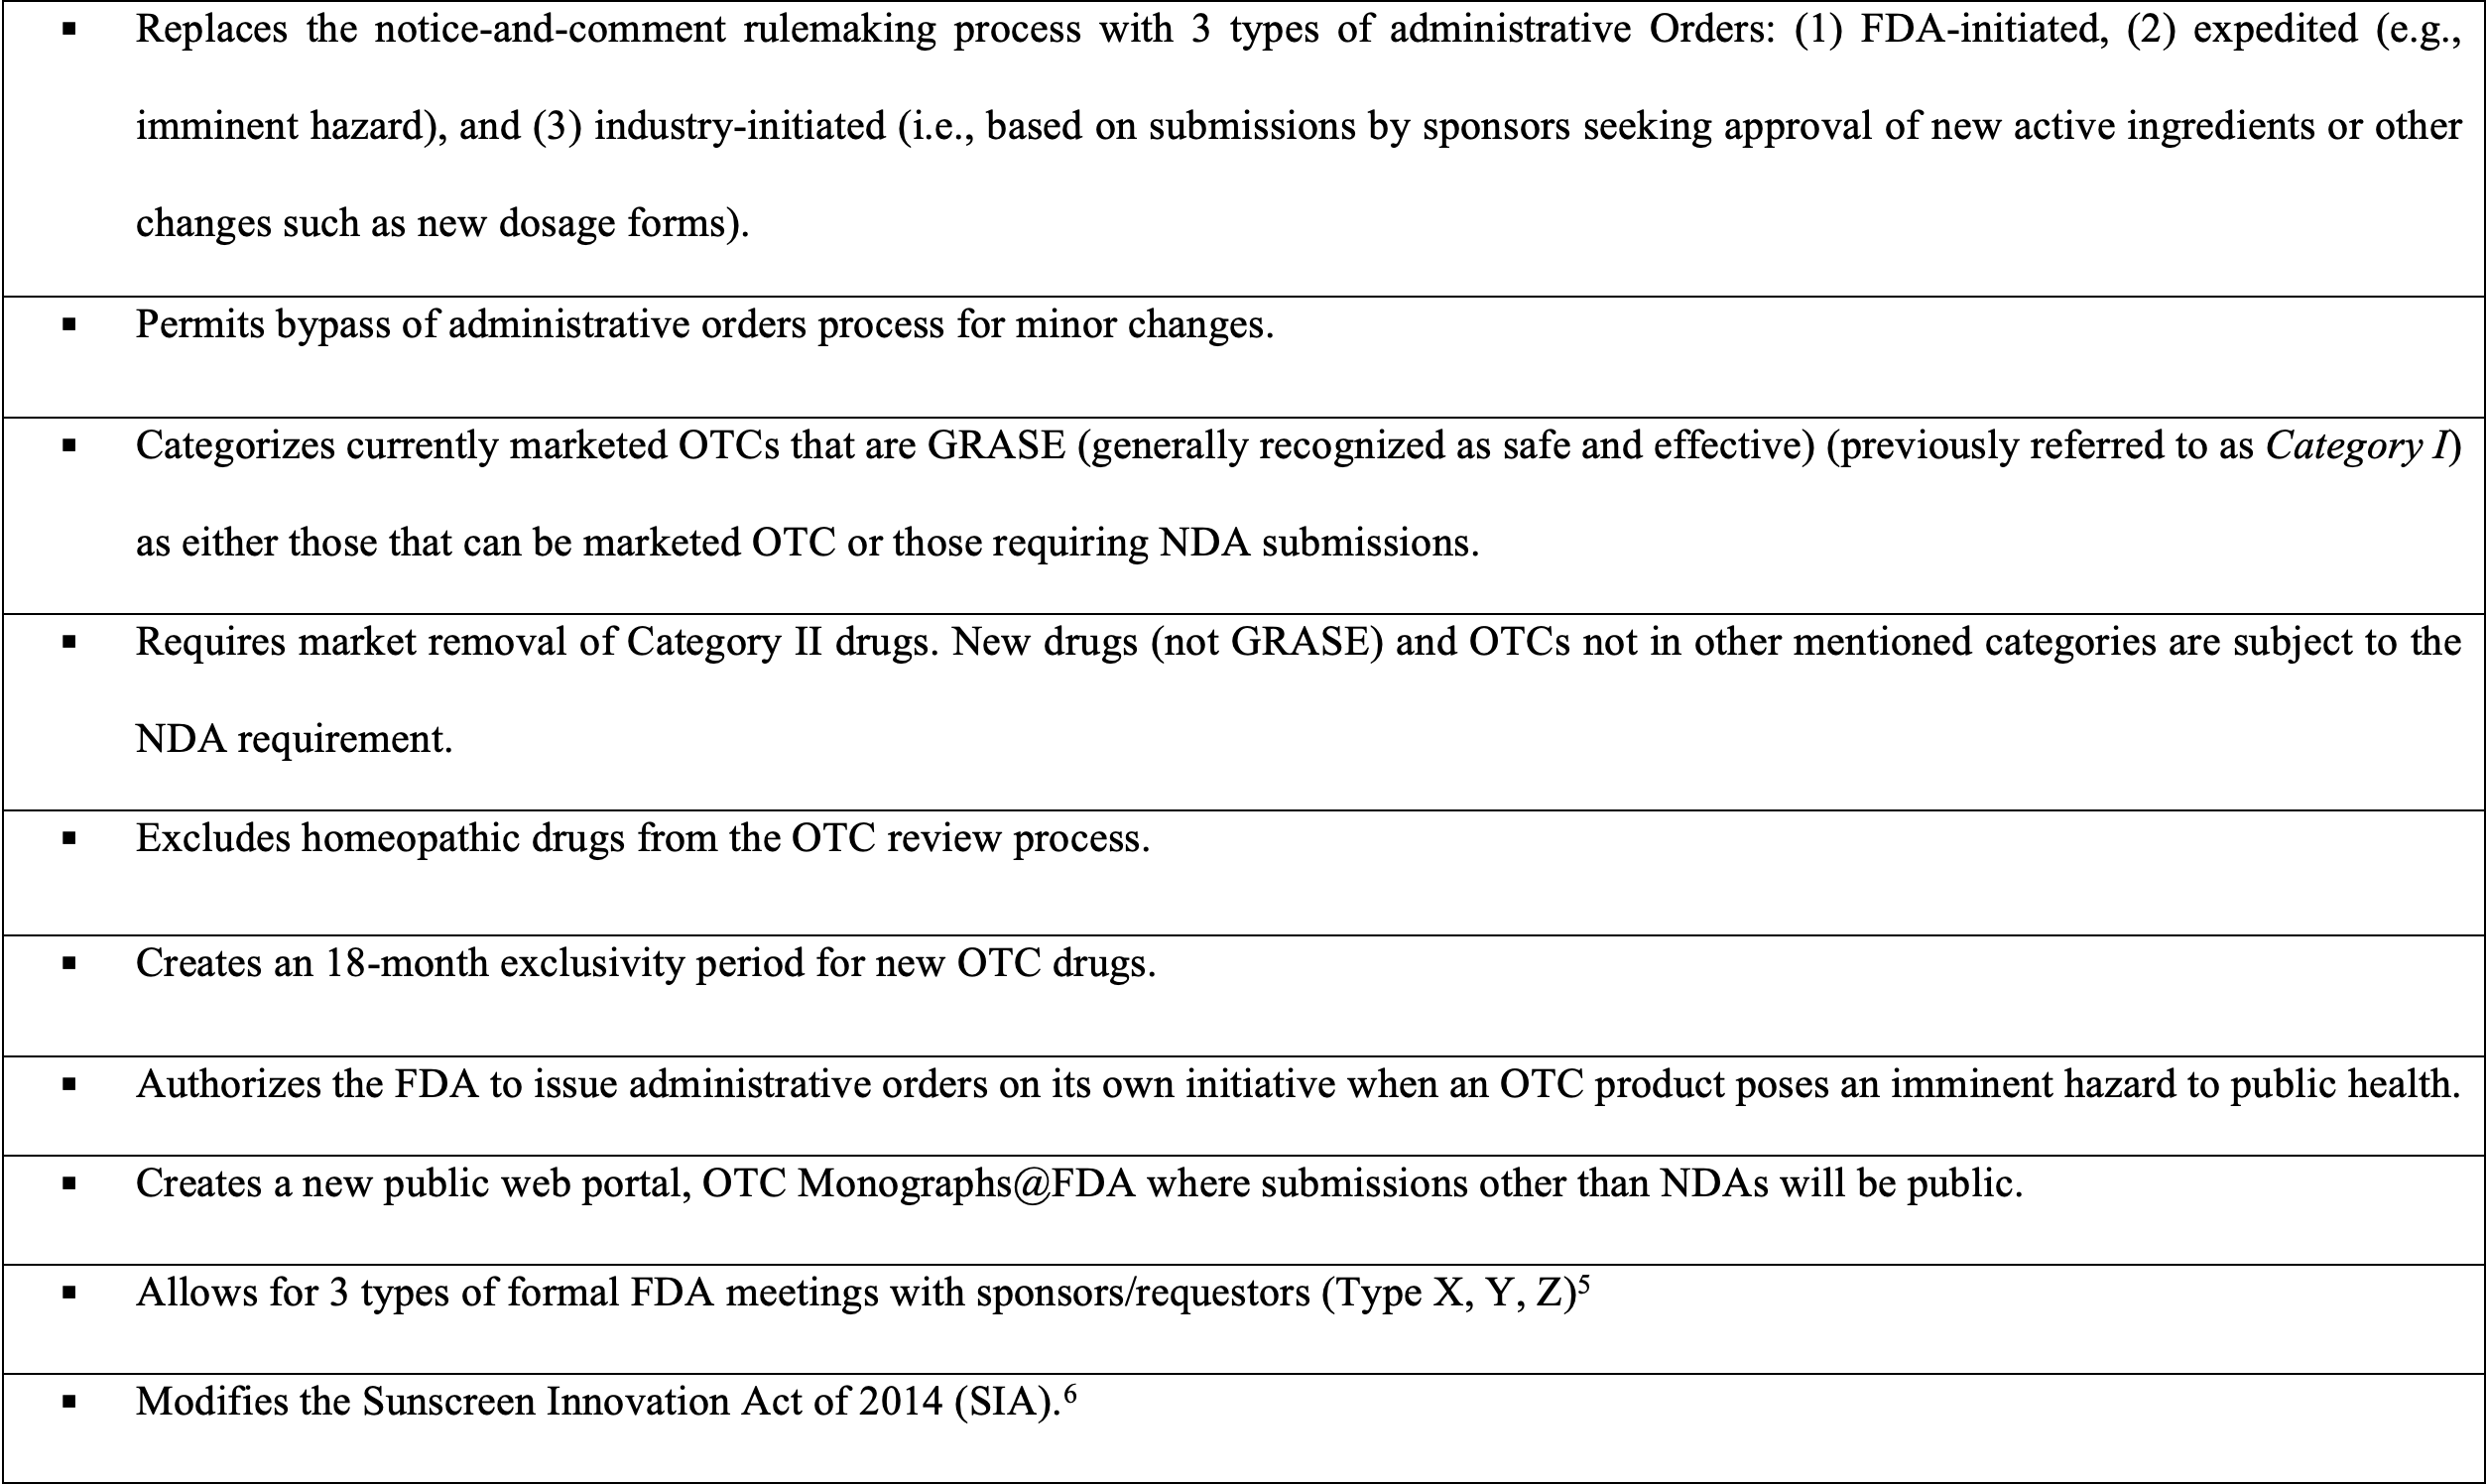 Table 1. Important Provisions of the OTC Monograph Reform